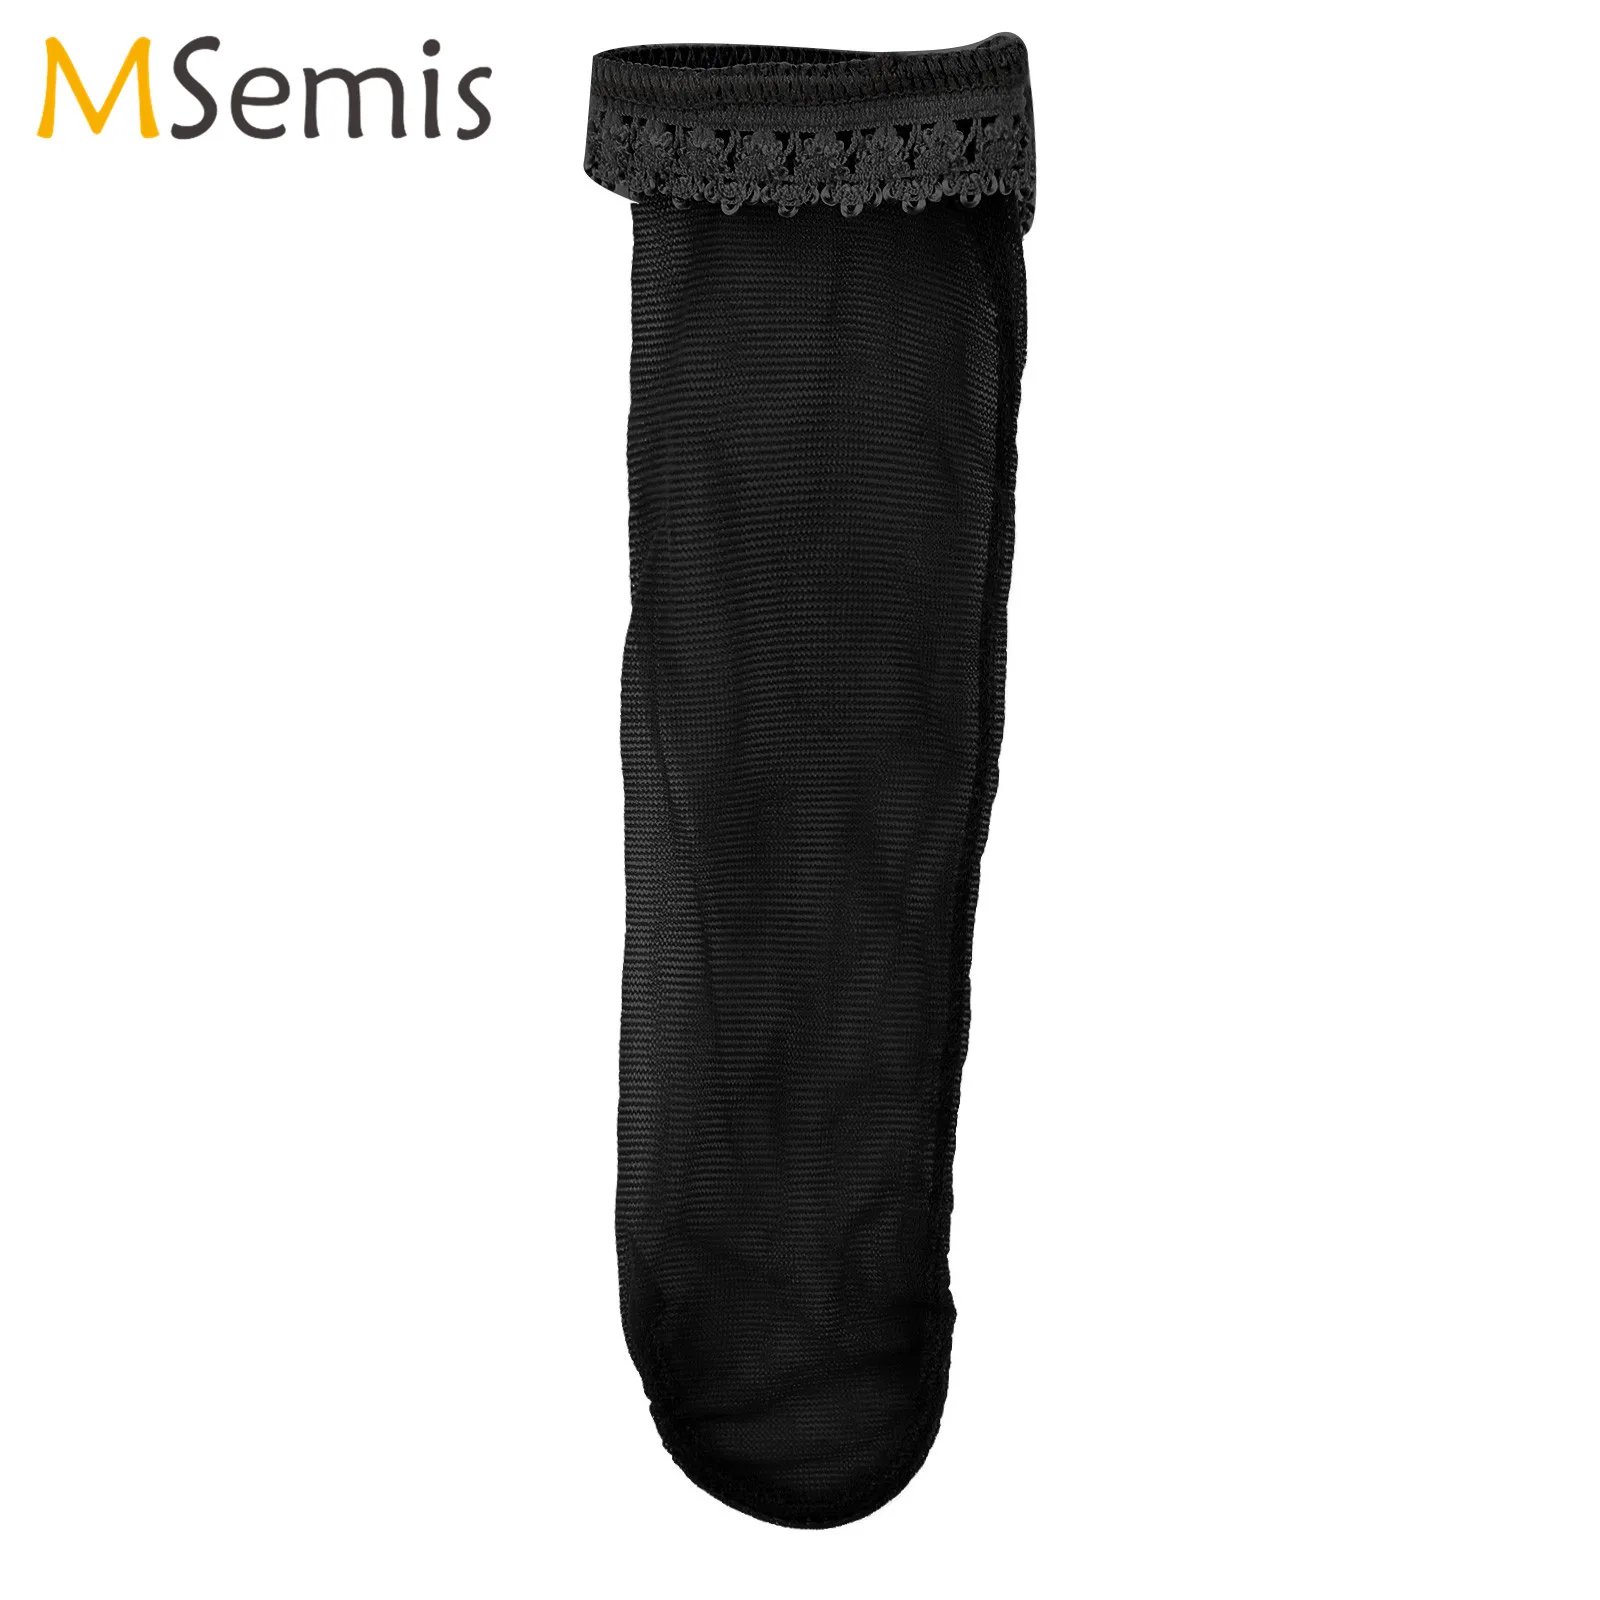 

Mens Cover Sheath Underwear Sissy Lace Trimming Bulge Pouch Thongs See-through Sexy Hot Gay Underpants Exotic Nightwear Costumes